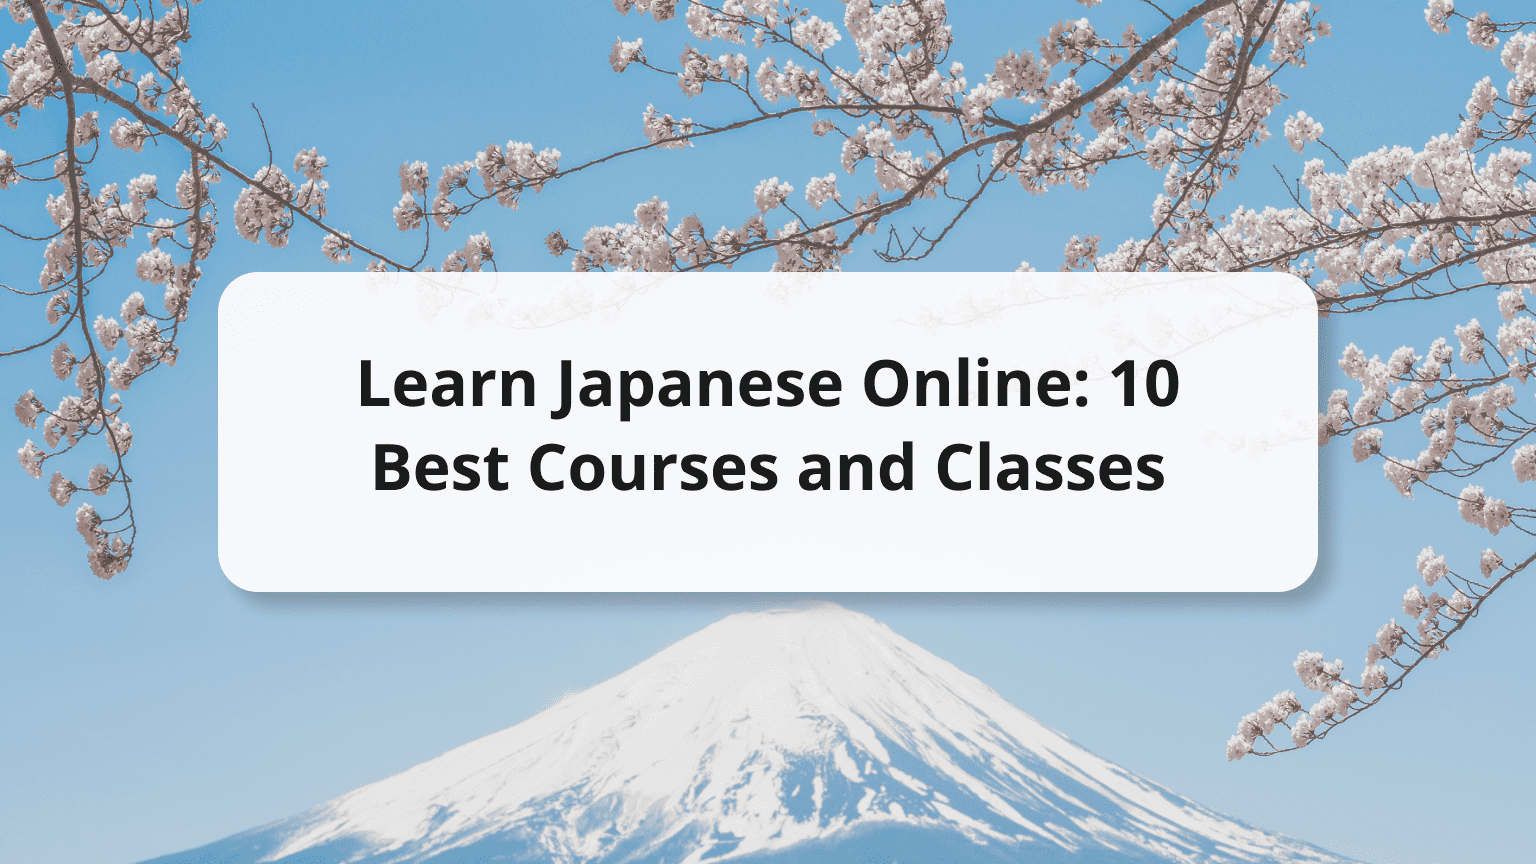 Any Good Online Japanese Classes For Beginners? : r/LearnJapanese